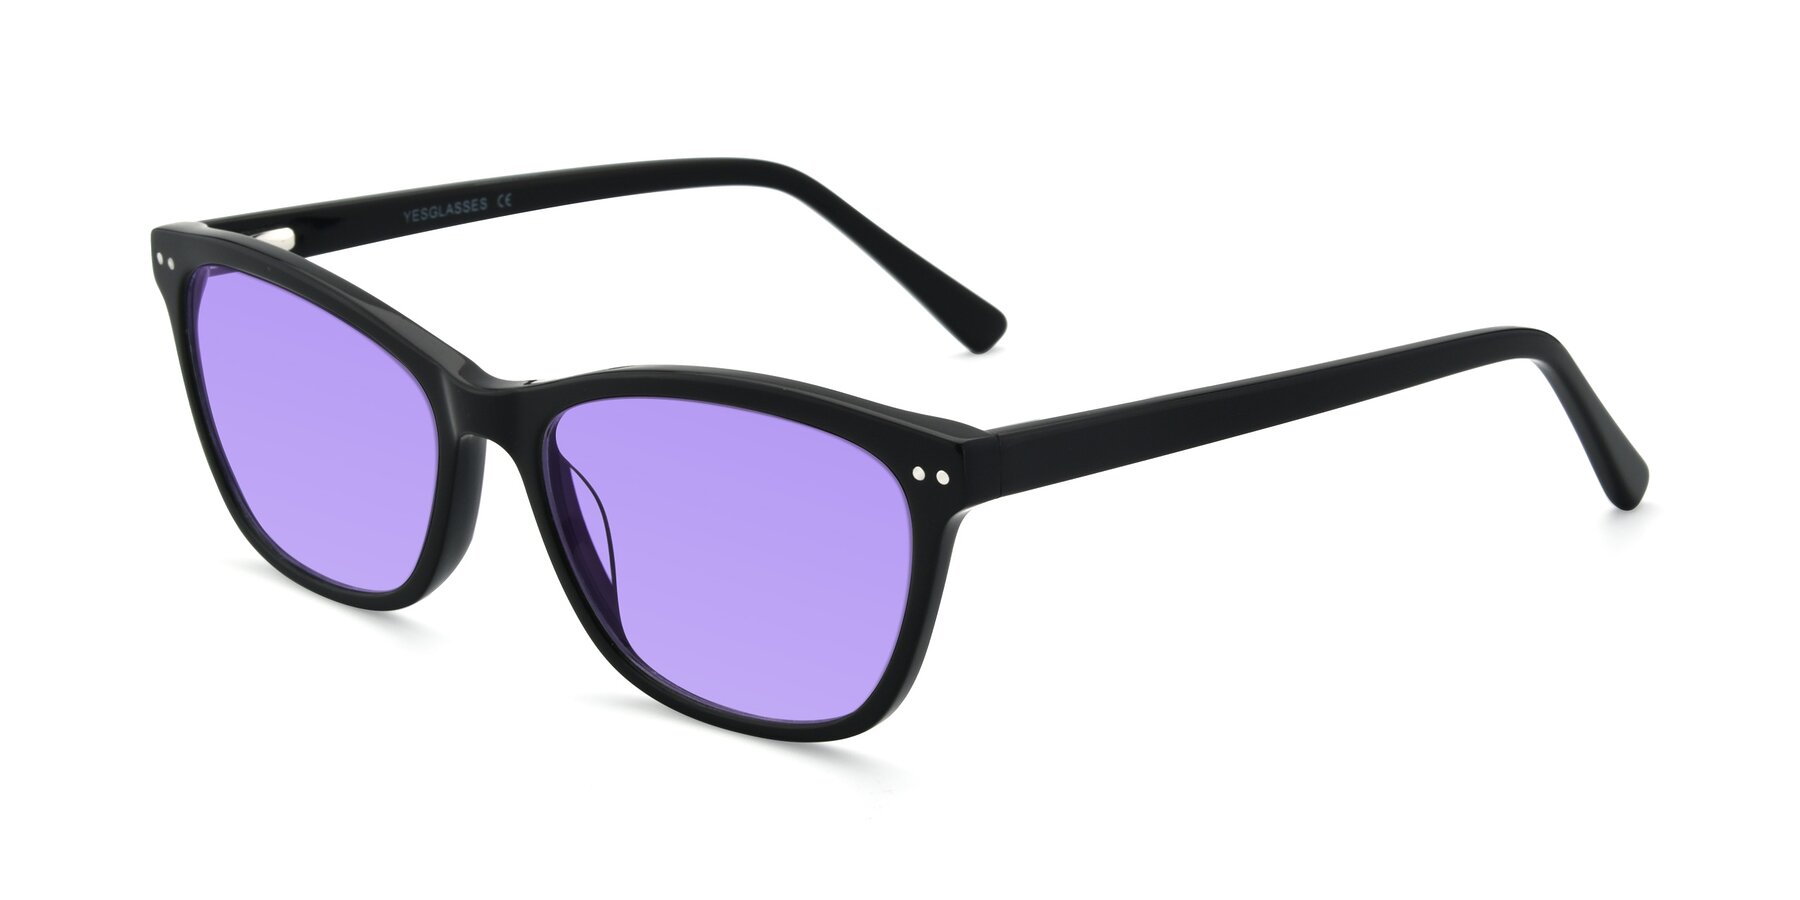 Angle of 17350 in Black with Medium Purple Tinted Lenses